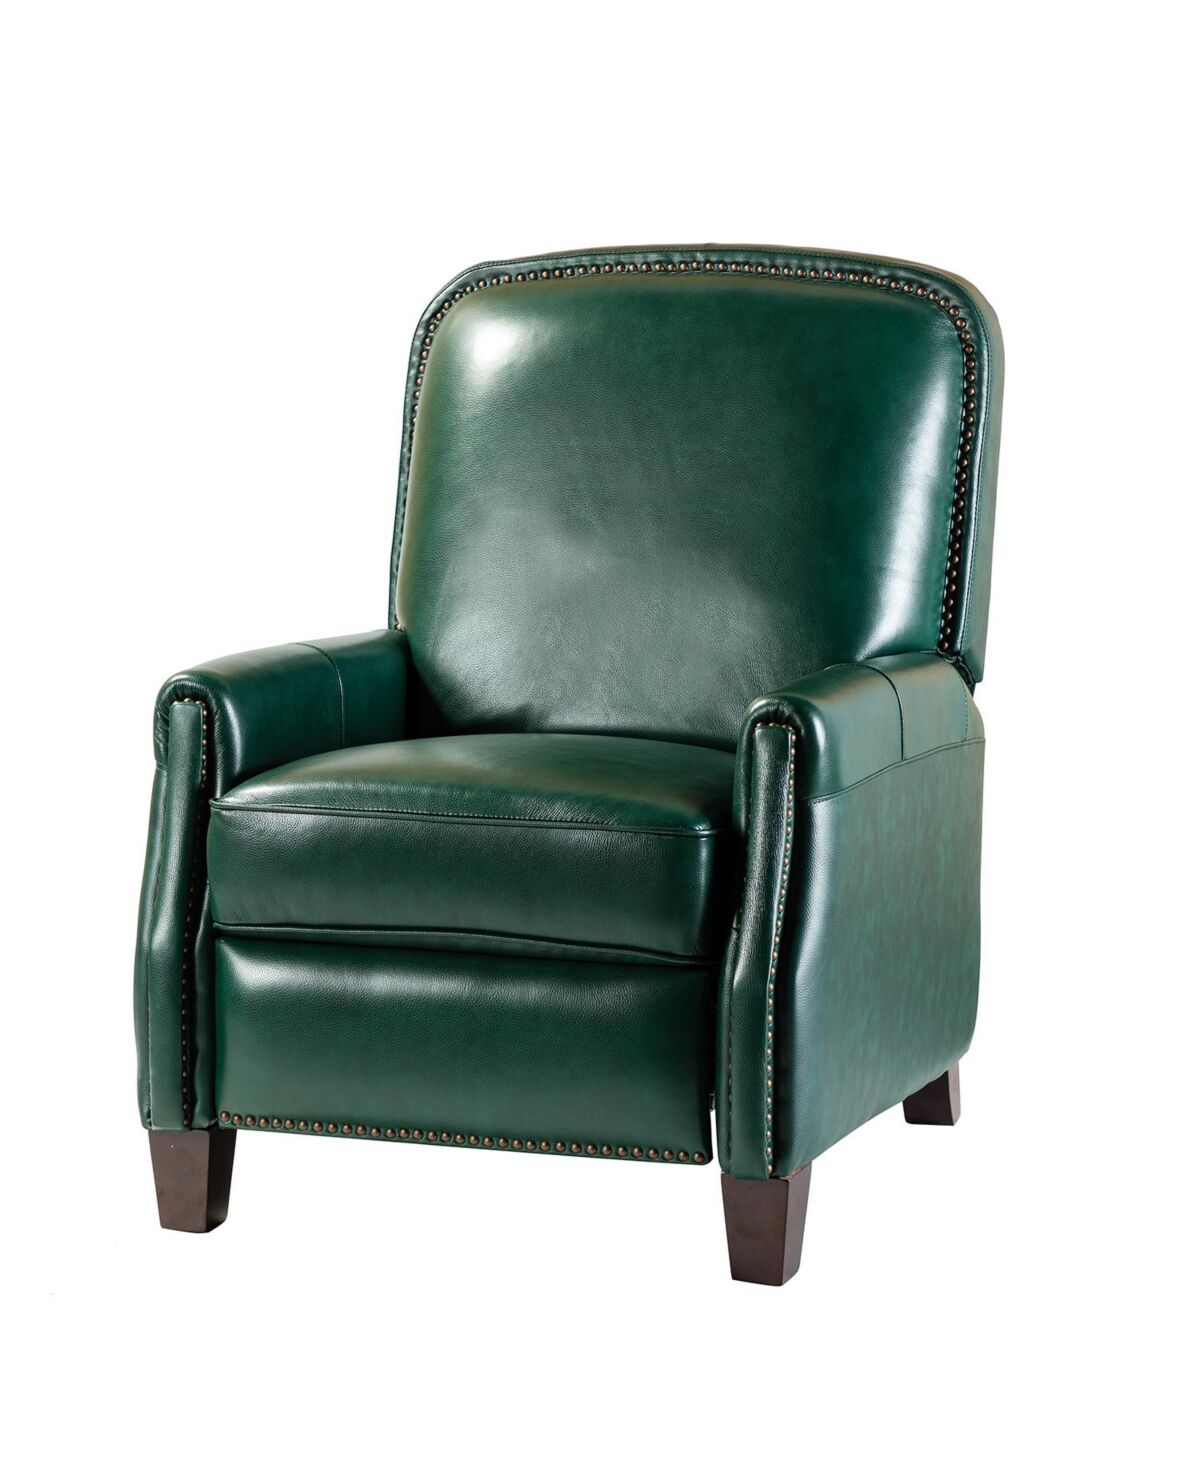 Hulala Home Hickey Modern Retro Genuine Leather Recliner with Nail Head Trim - Green